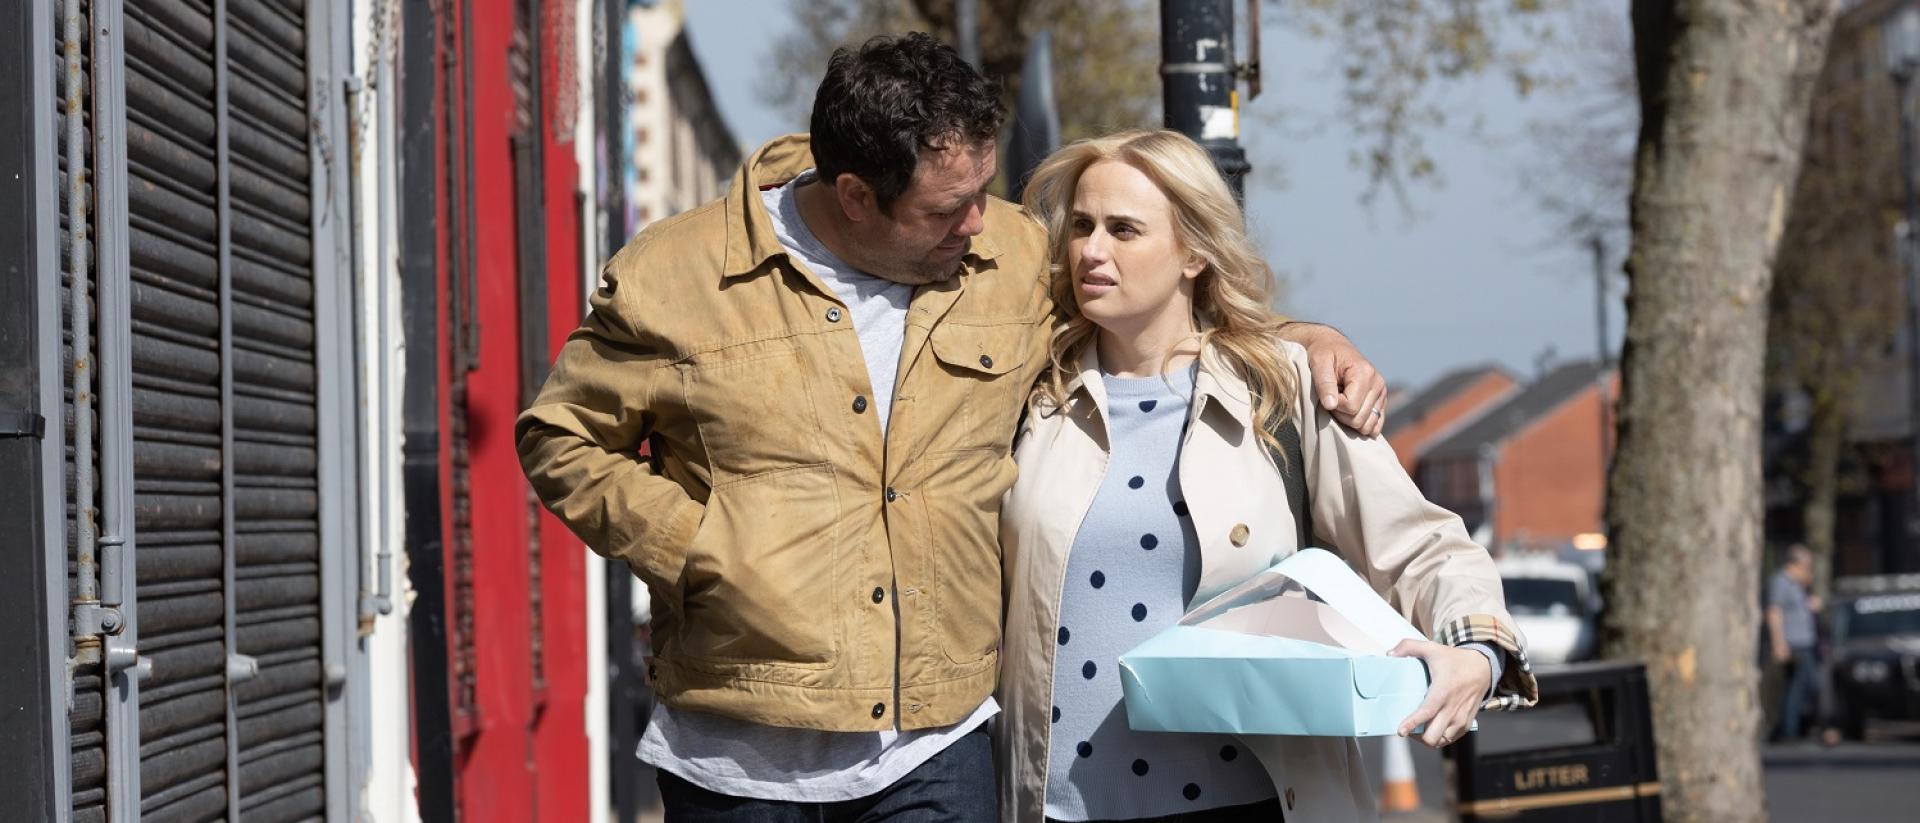 A still from The Almond and The Seahorse featuring Celyn Jones and Rebel Wilson walking down a street during the day. He has his arm around her shoulders, and she is carrying a box.